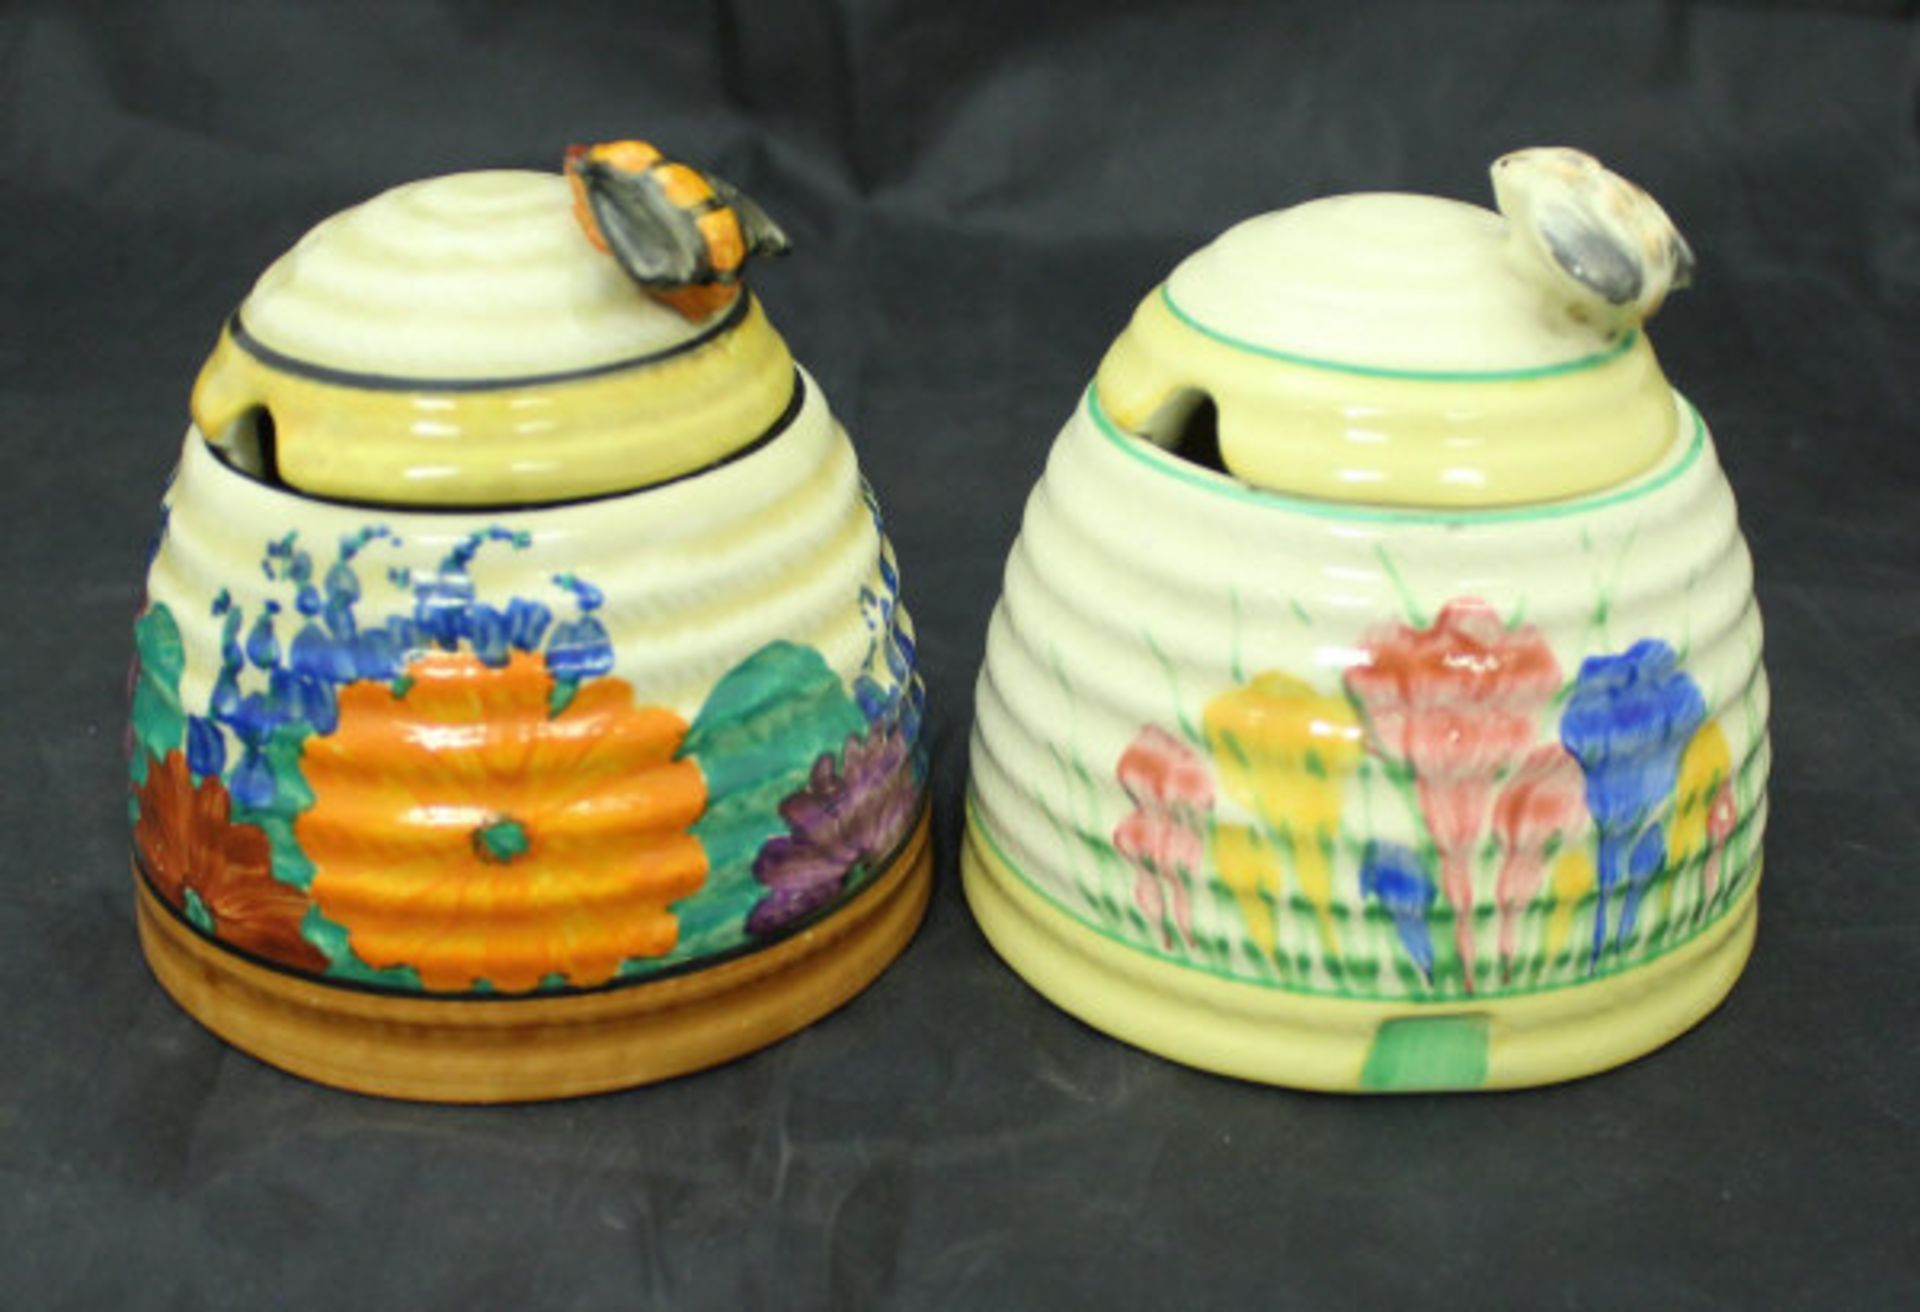 A Clarice Cliff "Bizarre" "Spring Crocus" honey pot and cover, - Image 3 of 3